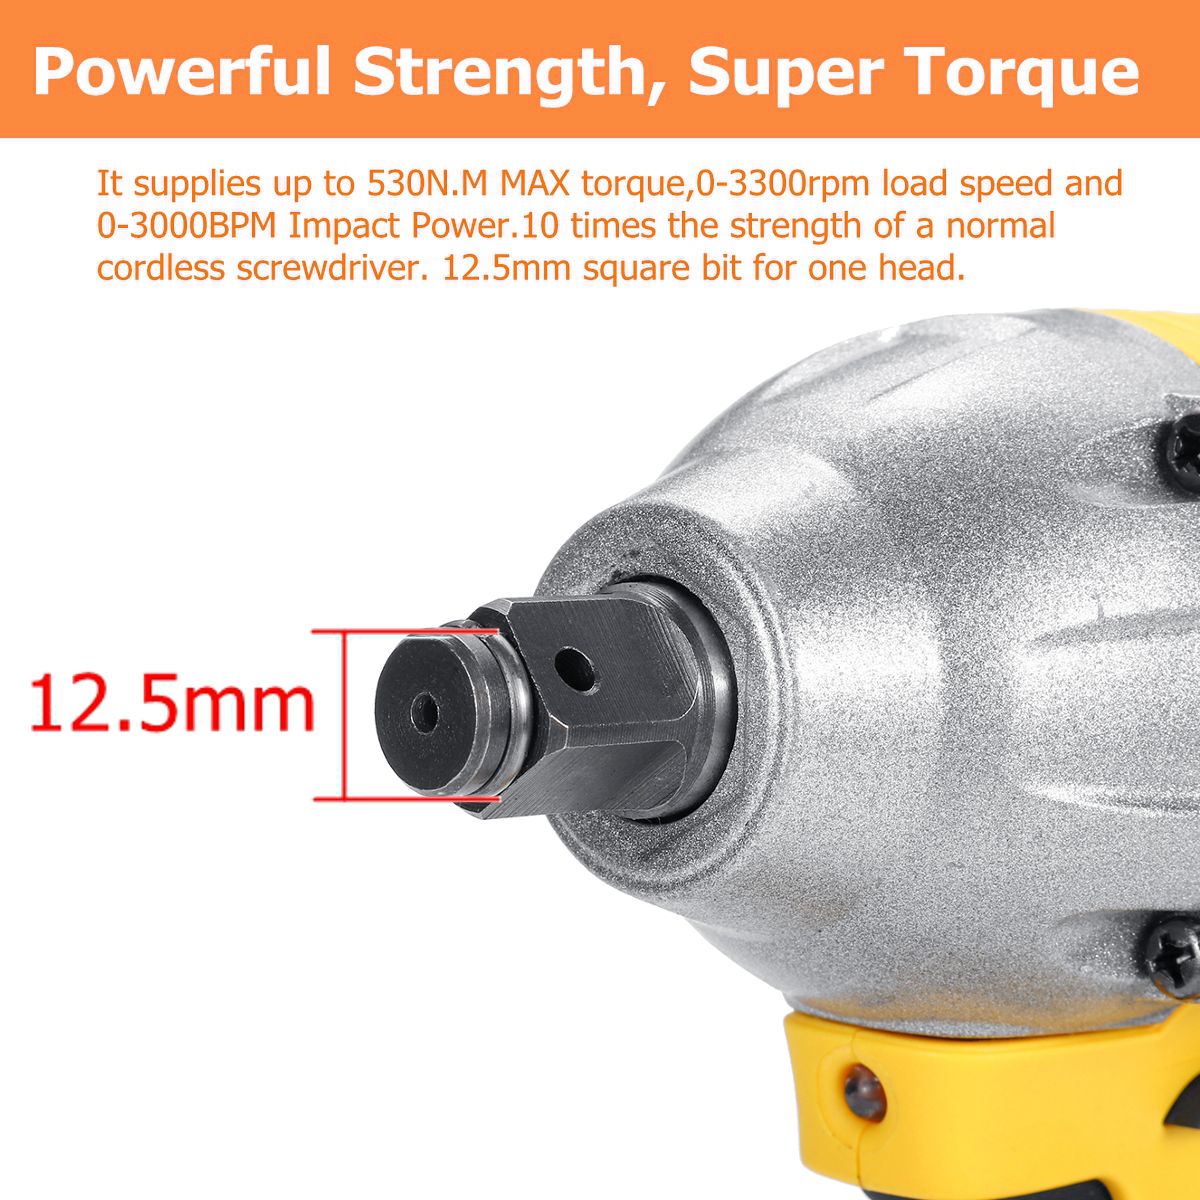 108VF-Electric-Cordless-Drill-Brushless-Impact-Wrench-Torque-Tool-30000mAh-LED-Lights-1614718